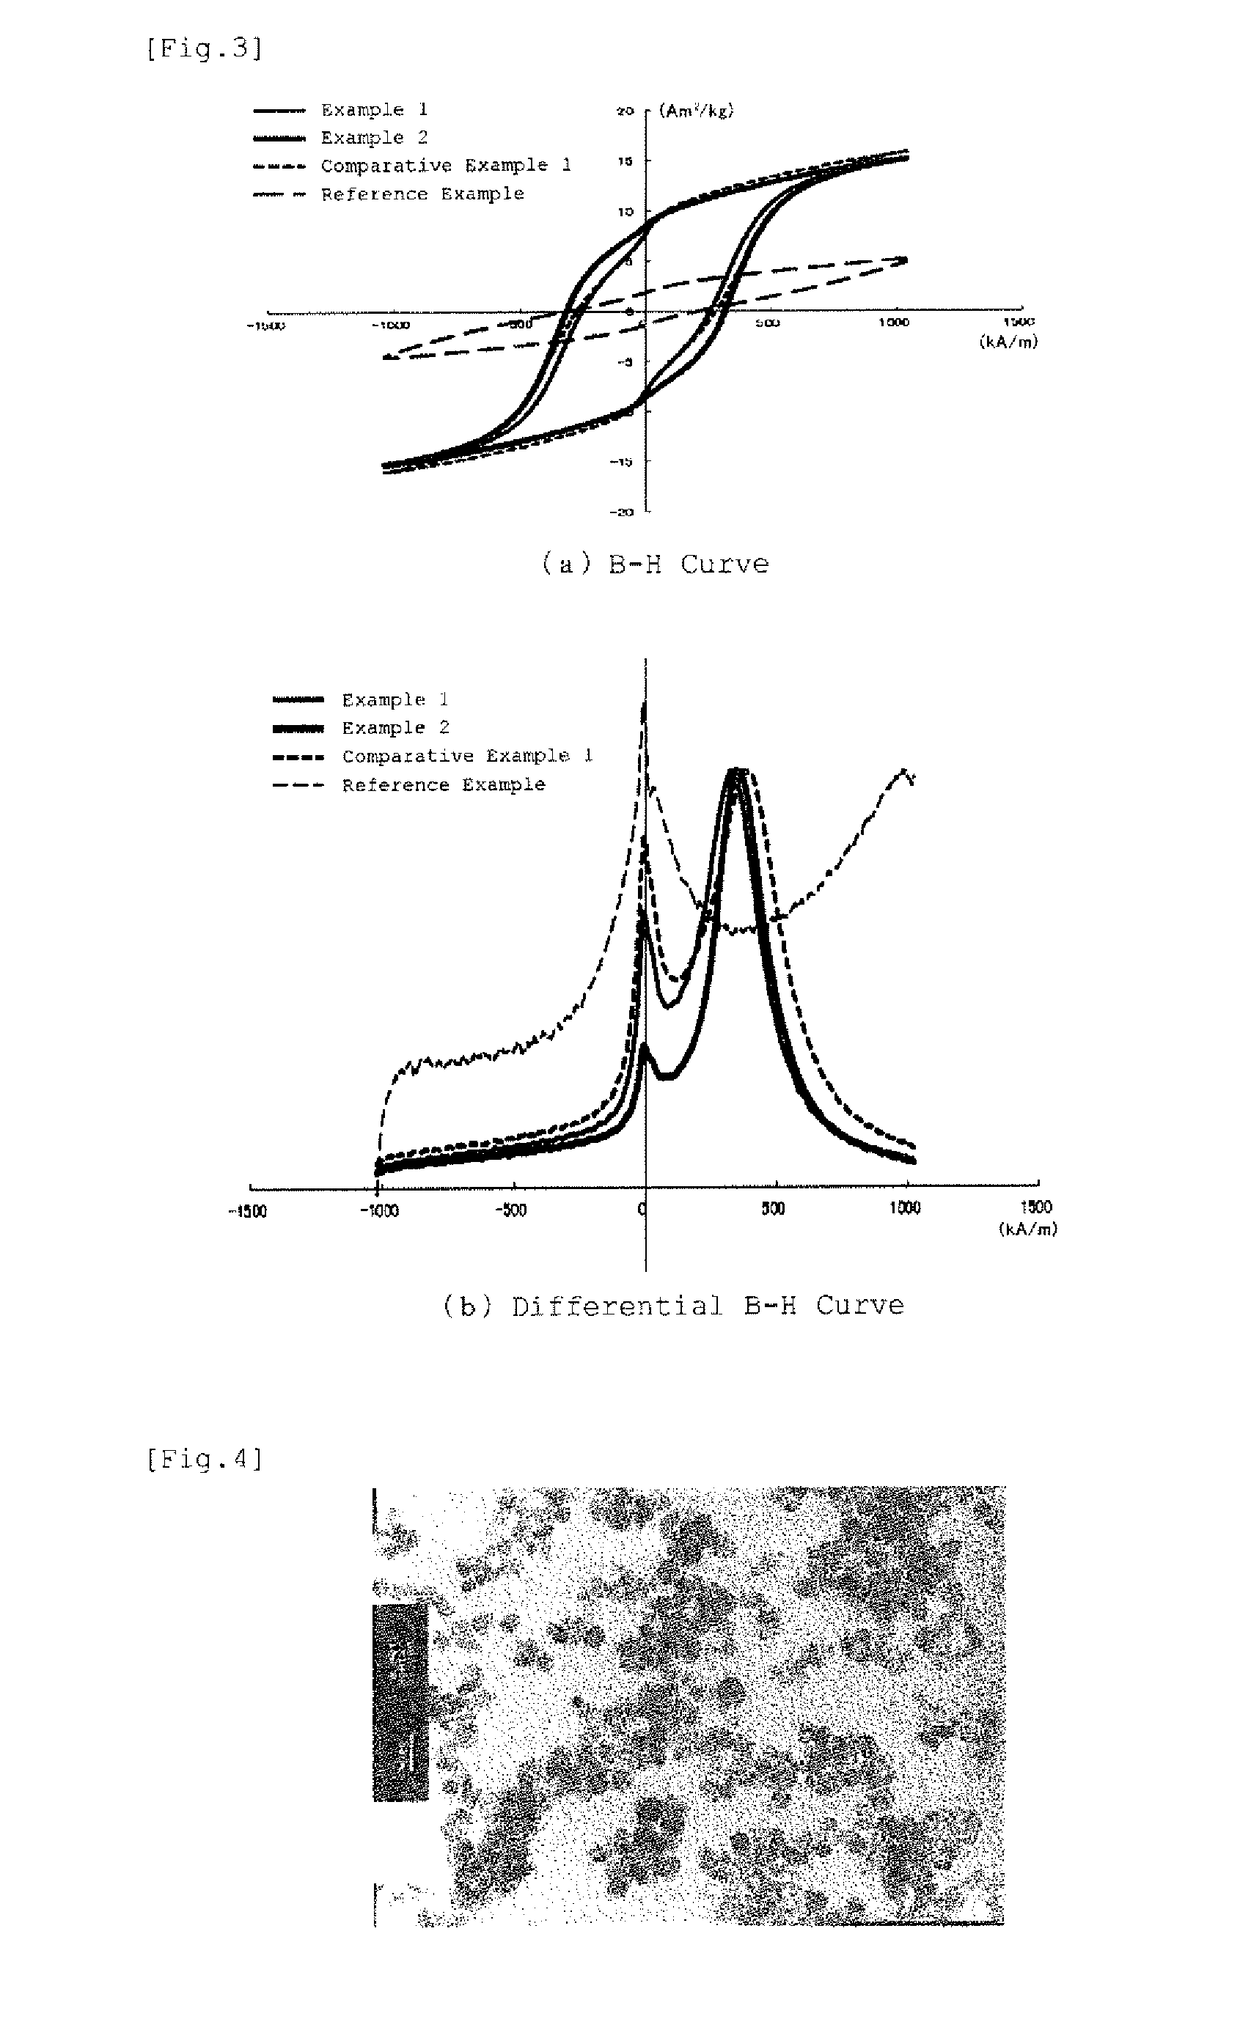 Iron-based oxide magnetic particle powder and method for producing iron-based oxide magnetic particle powder